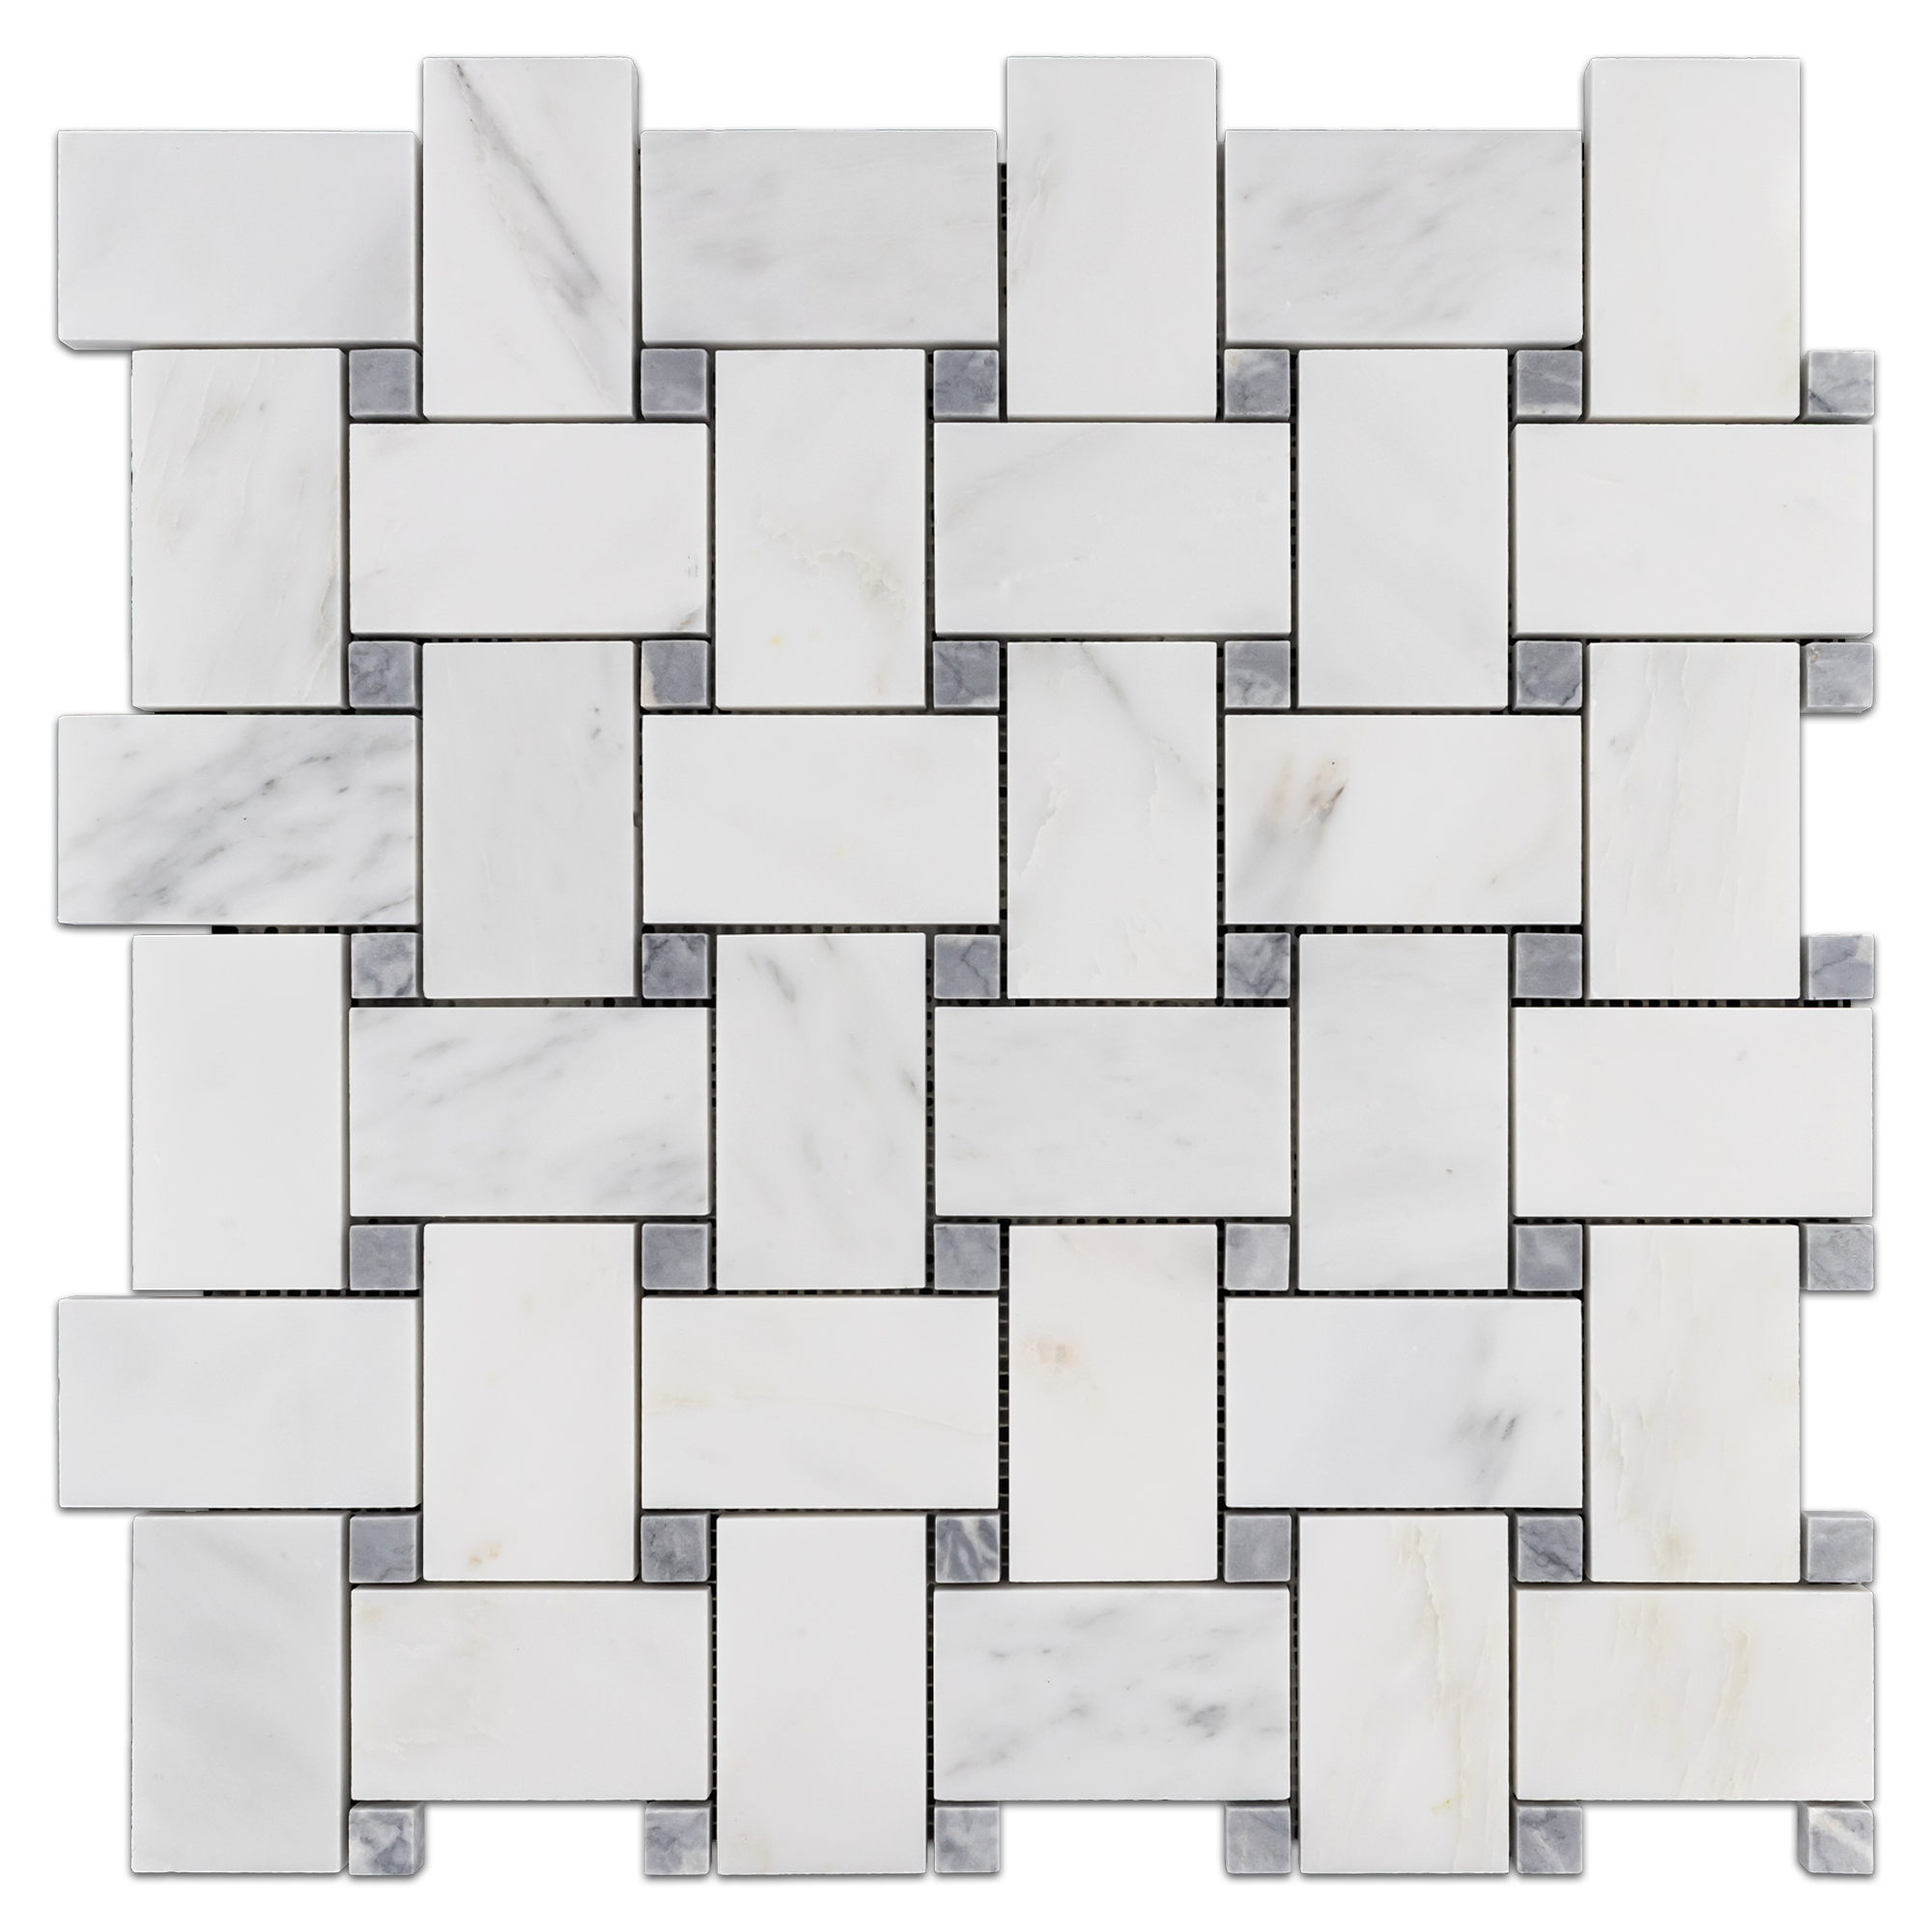 Elon Pearl White Pacific Gray Marble Stone Blend Basketweave Field Mosaic 15.75x15.75x0.375 Honed - Surface Group International Product